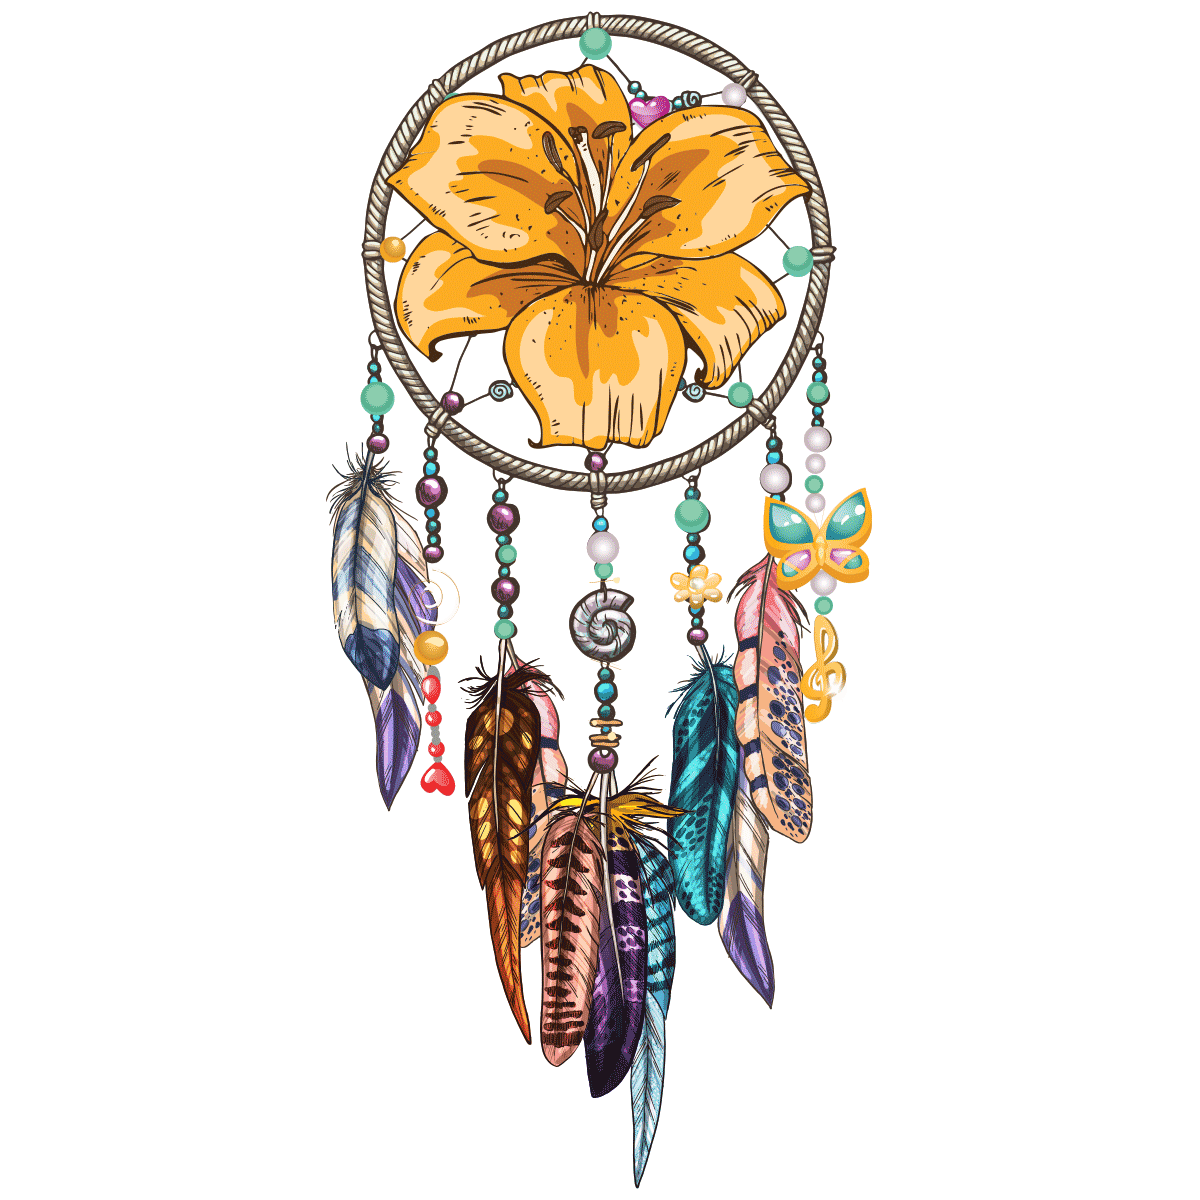 Royalty-Free Dreamcatcher PNG Free Photo PNG Image